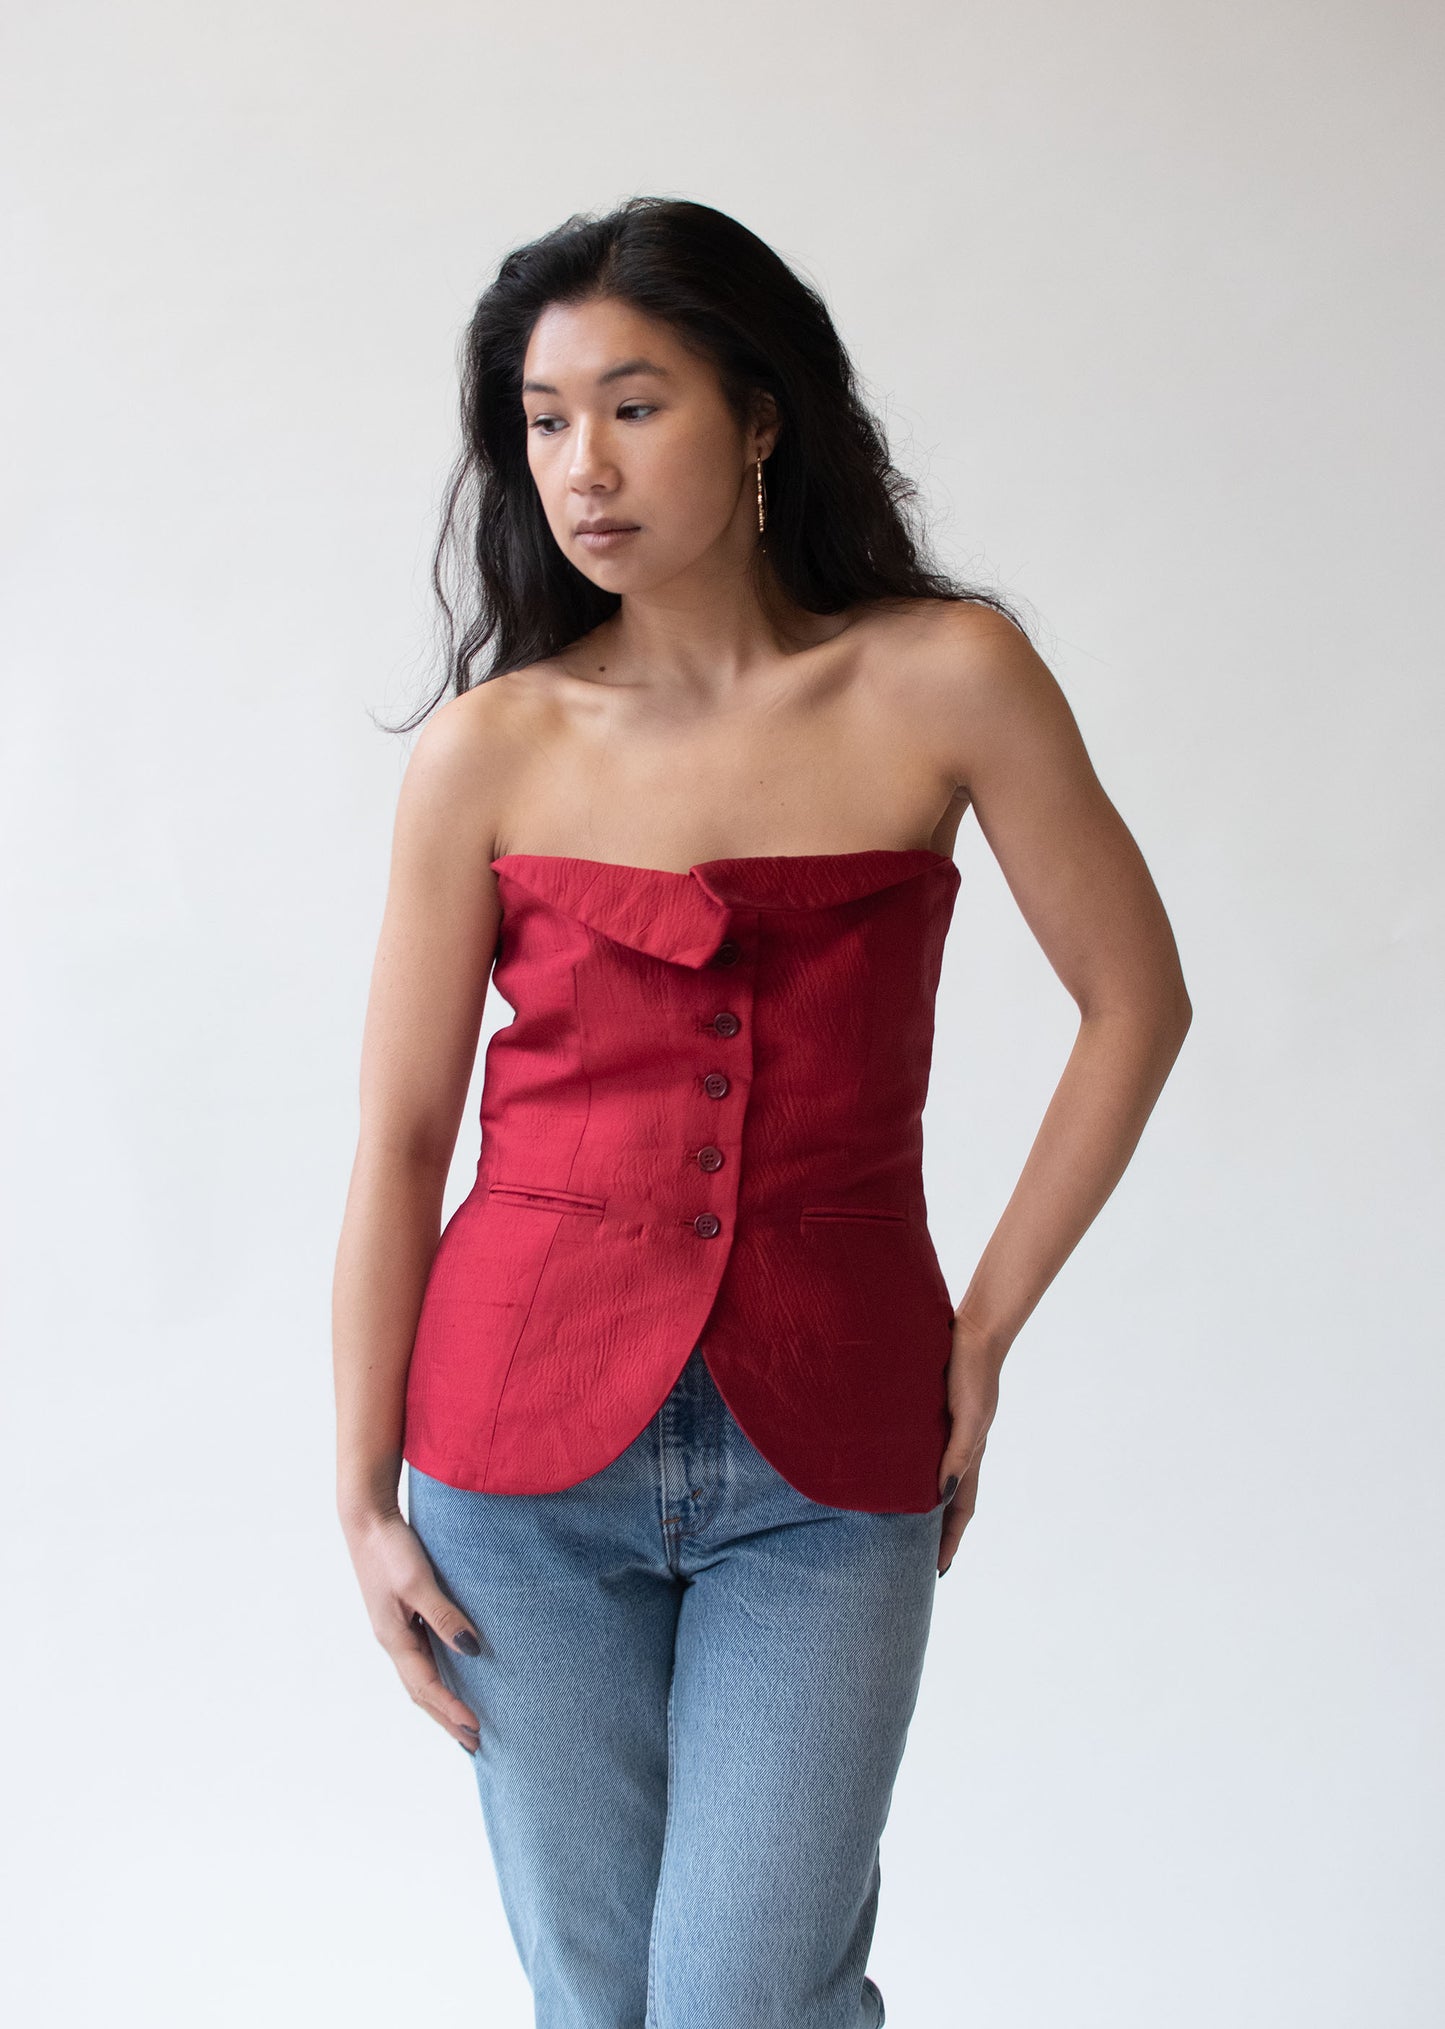 Red Bustier | Romeo Gigli 1991